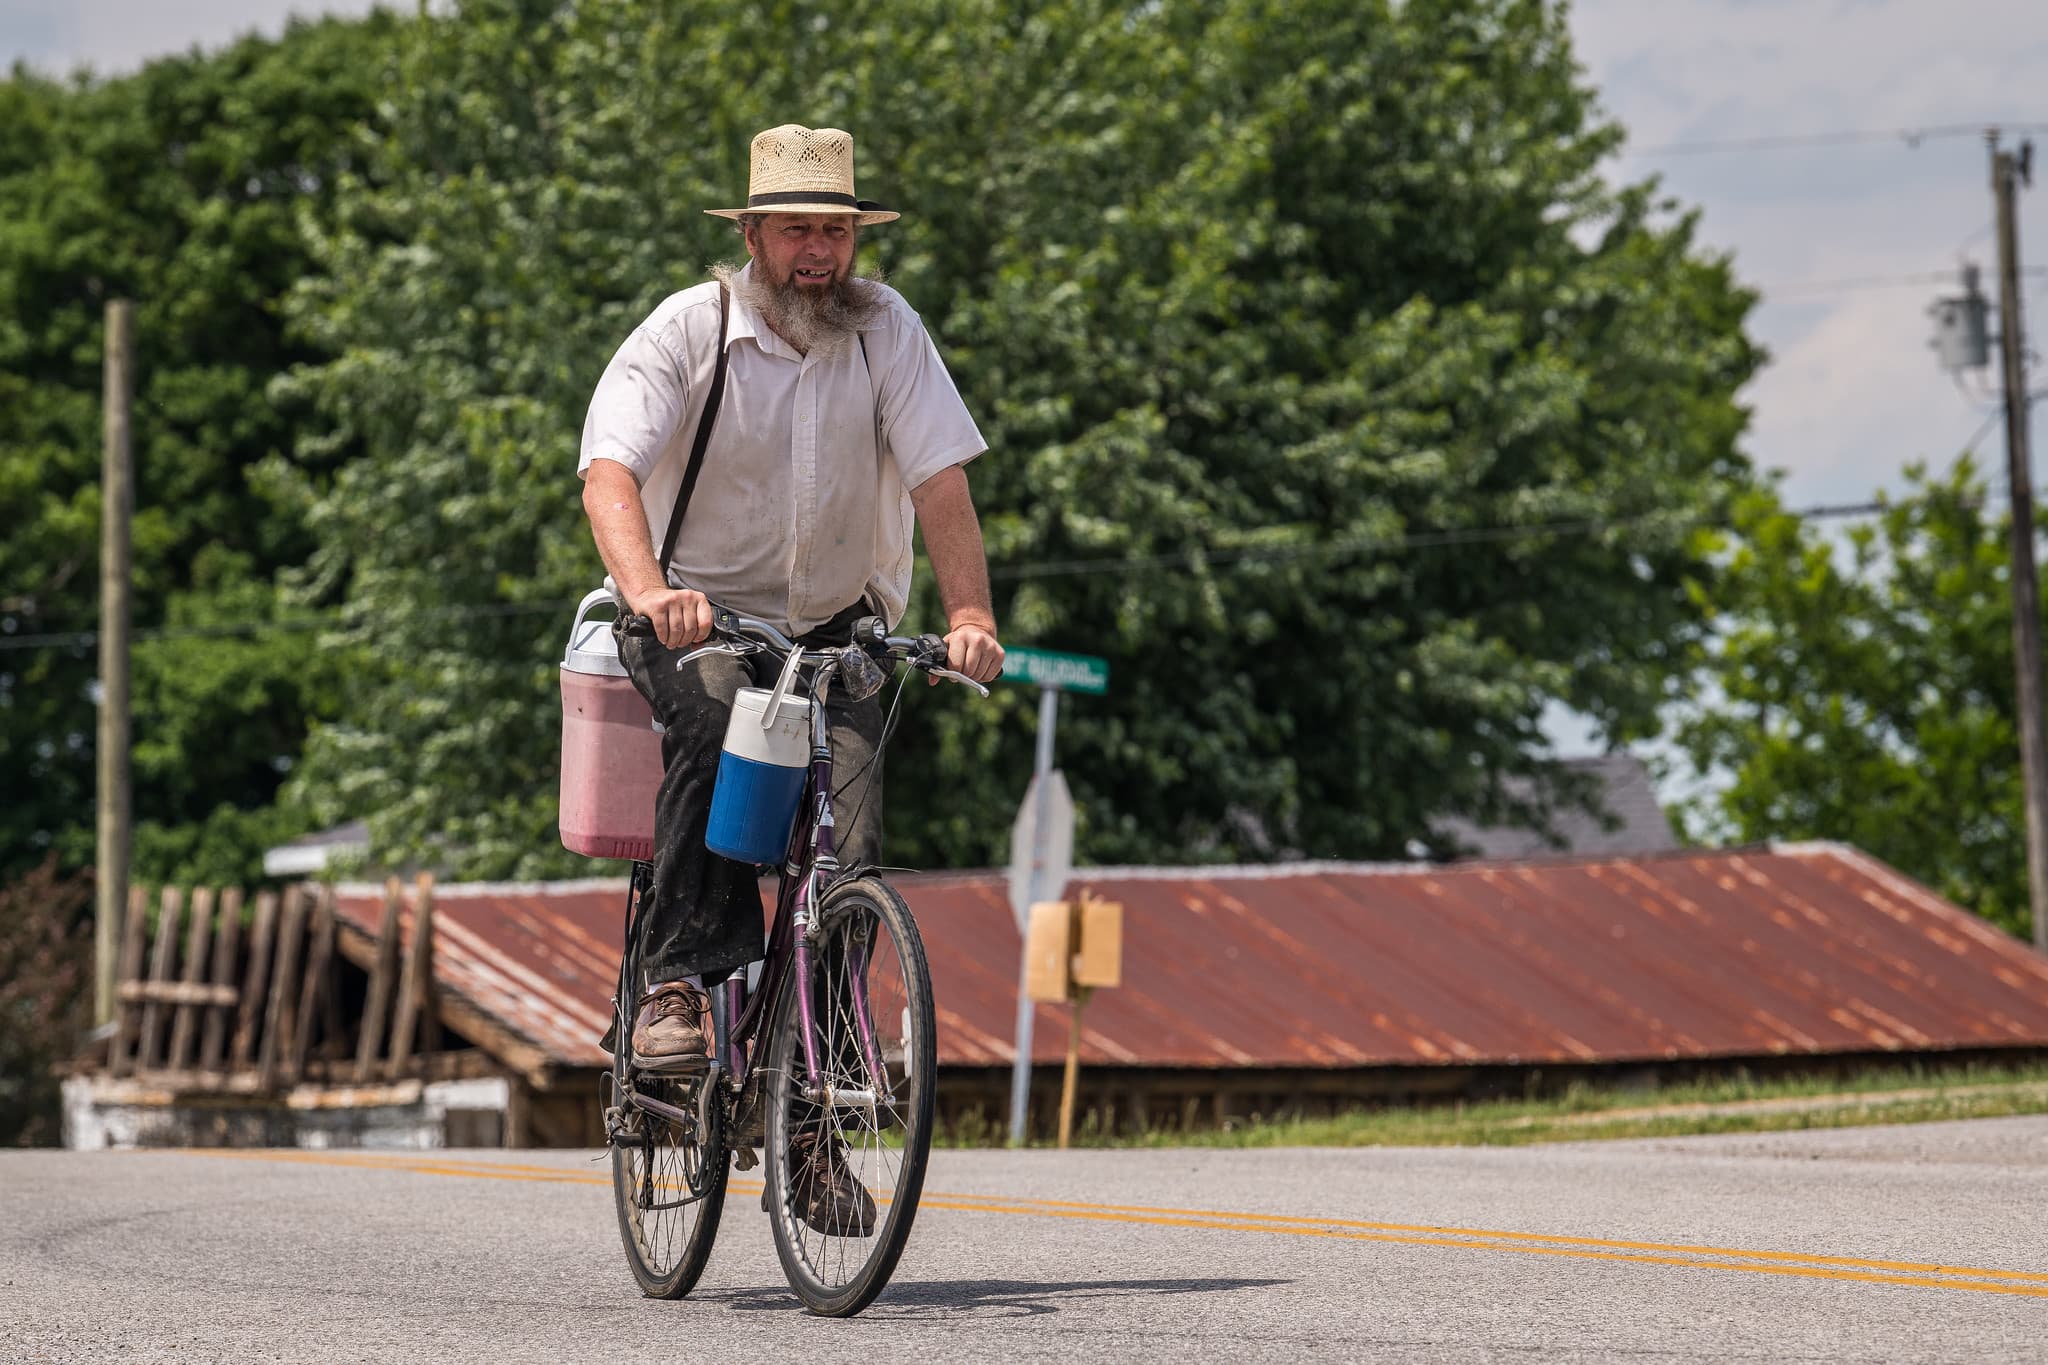 Believe it or not, the Amish are loving electric bikes